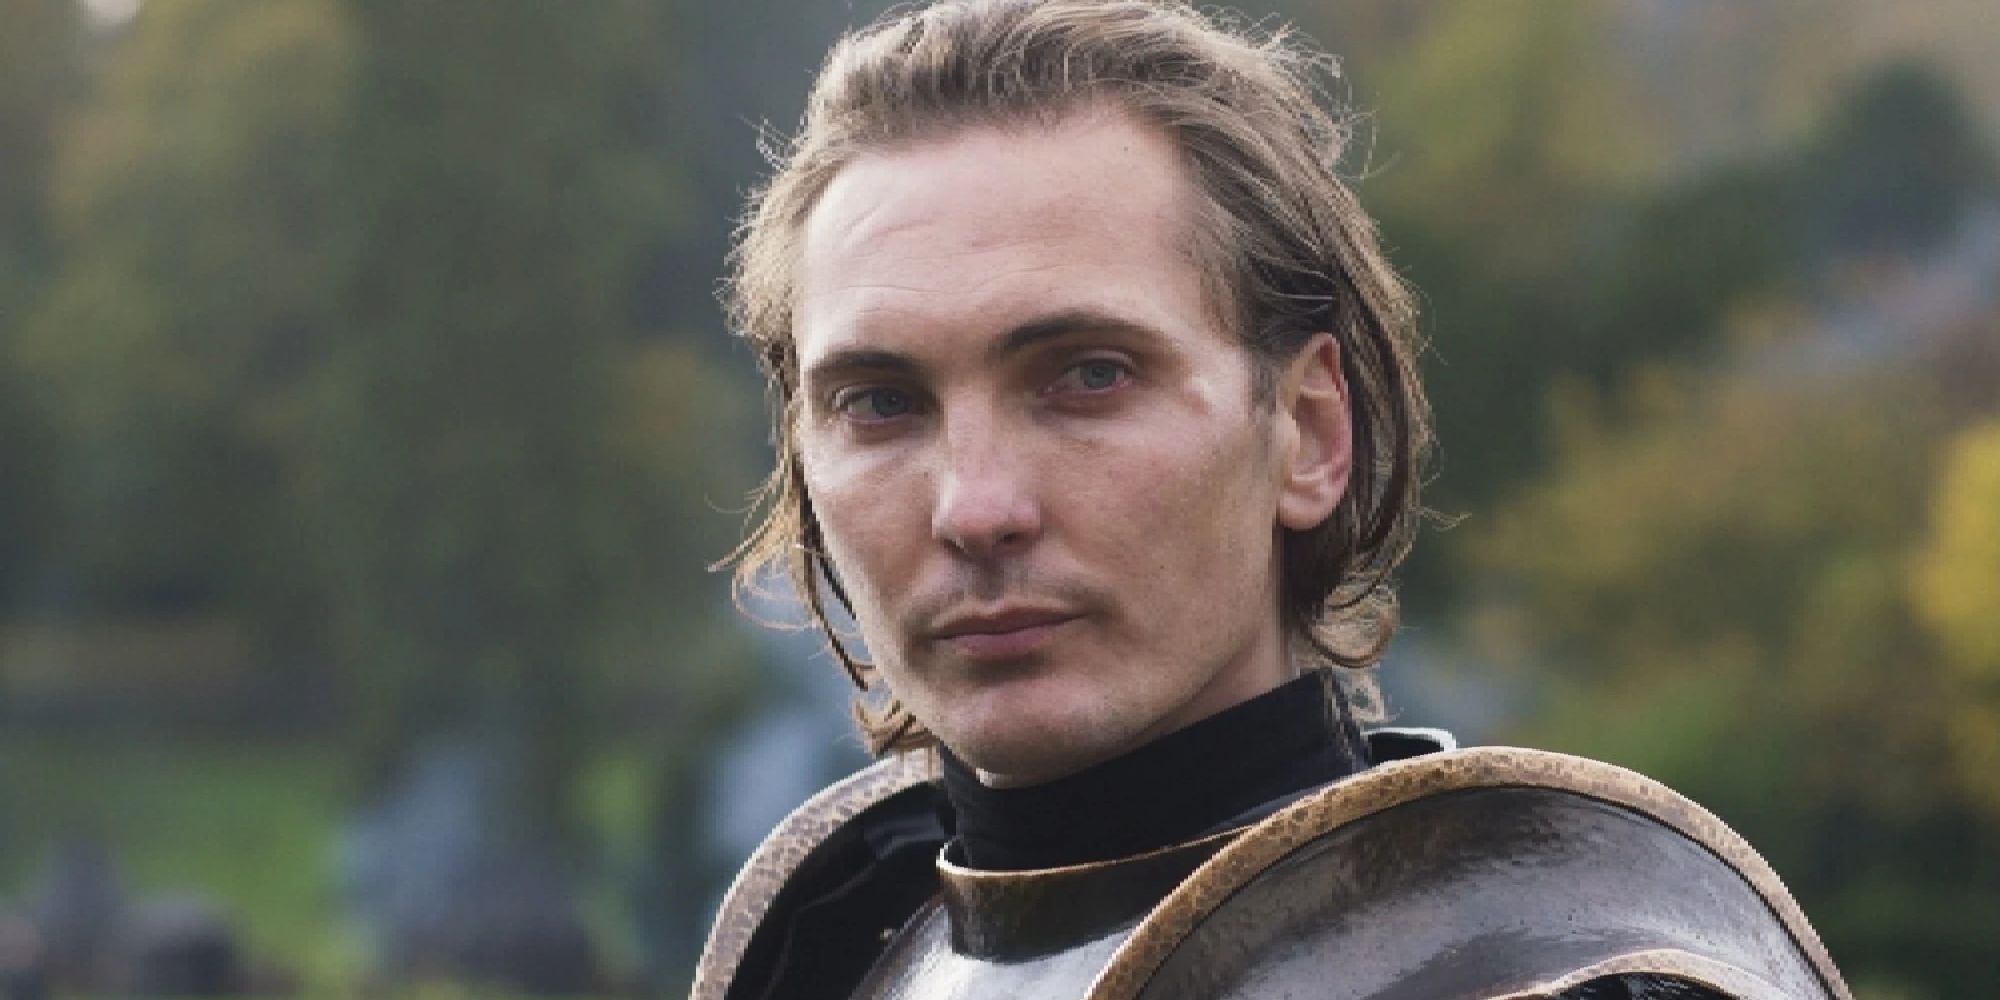 Eamon Farren as Cahir in The Witcher